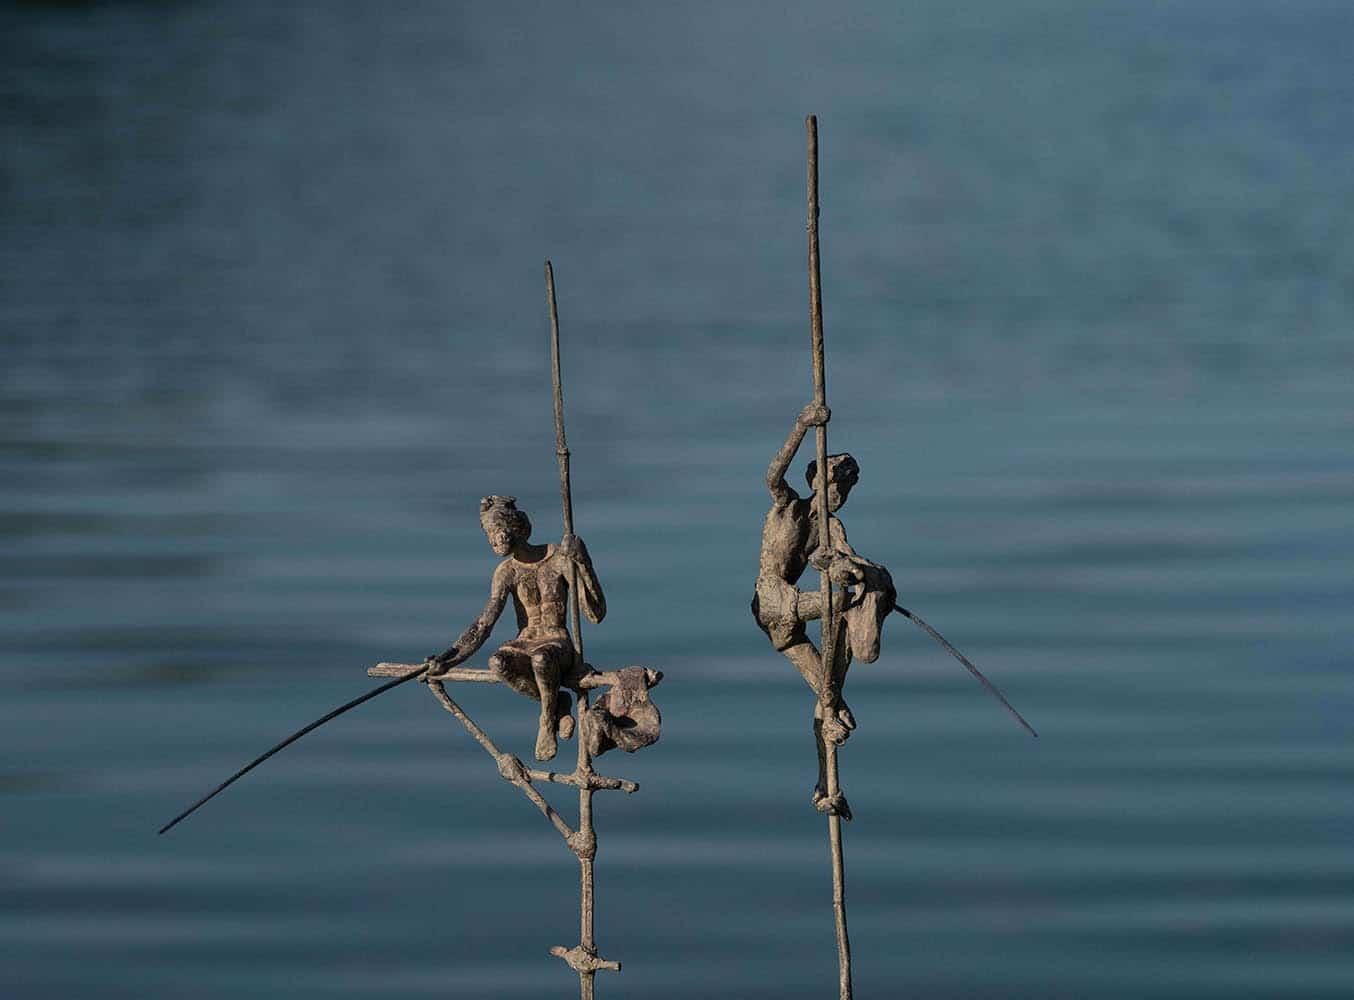 Group of Two Fishermen on Stilt IV is a bronze sculpture by French contemporary artist Marine de Soos, dimensions are 50 × 45 × 32 cm (19.7 × 17.7 × 12.6 in). 
The sculpture is signed and numbered, it is part of a limited edition of 8 editions + 4